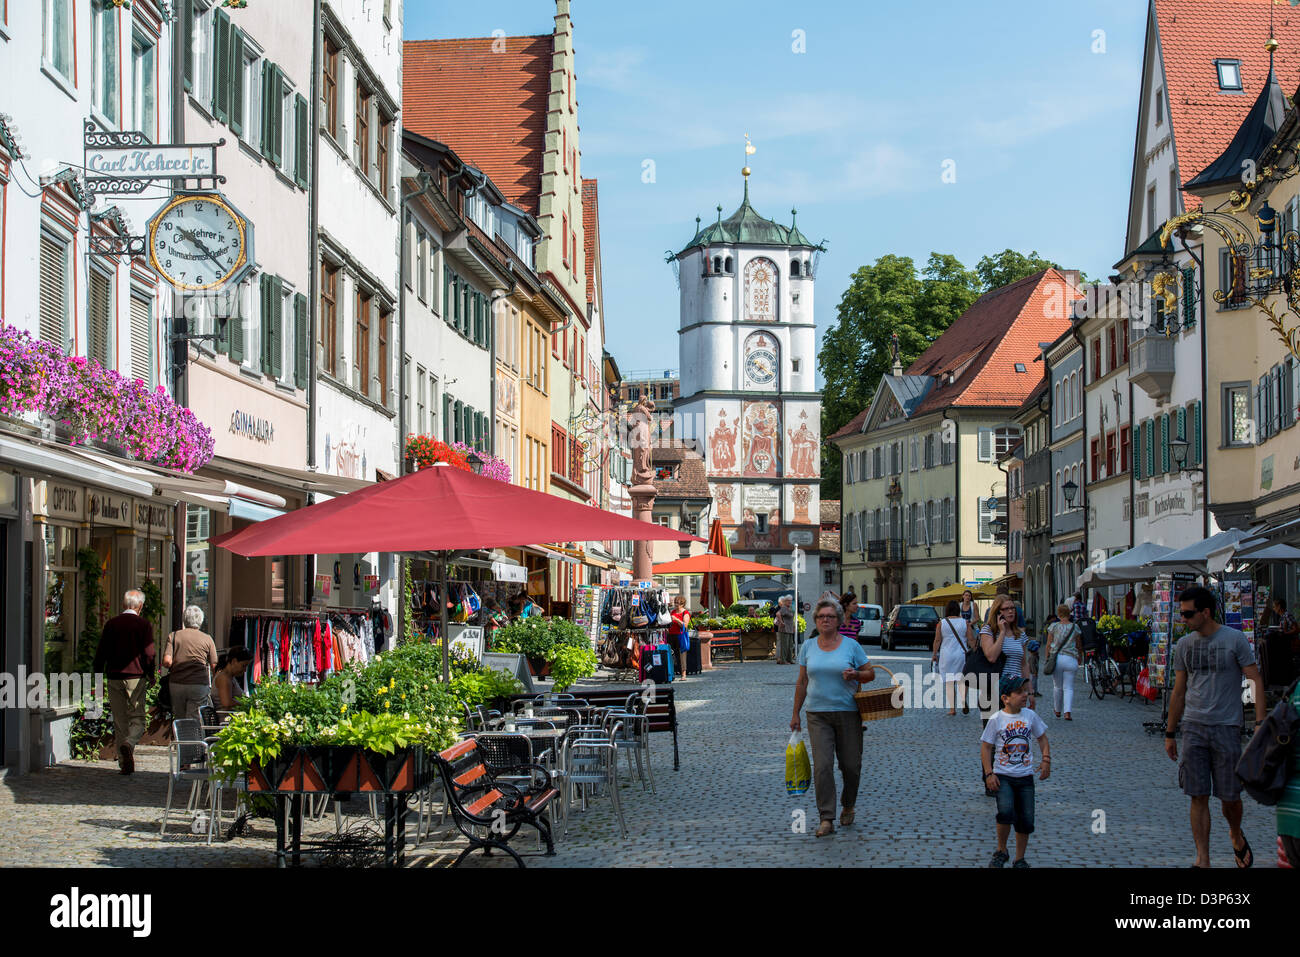 Old Town center of Wangen with Tower and Archway, Allgau, Baden-Wurttemberg, Germany Stock Photo